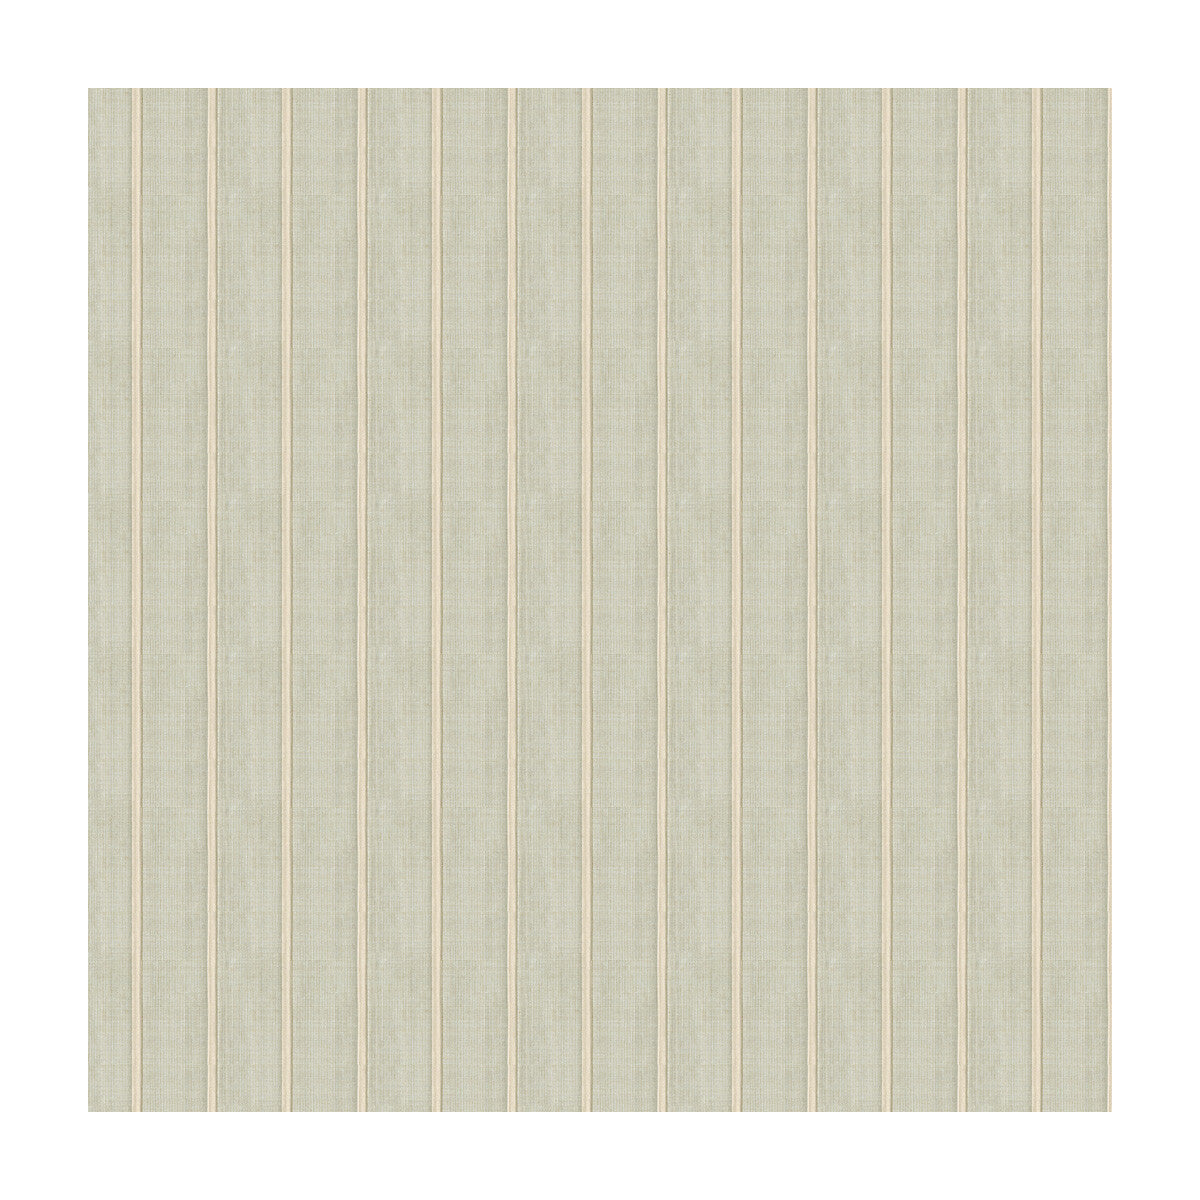 Empress Cloth fabric in patina color - pattern 9907.16.0 - by Kravet Couture in the Barbara Barry Panorama collection